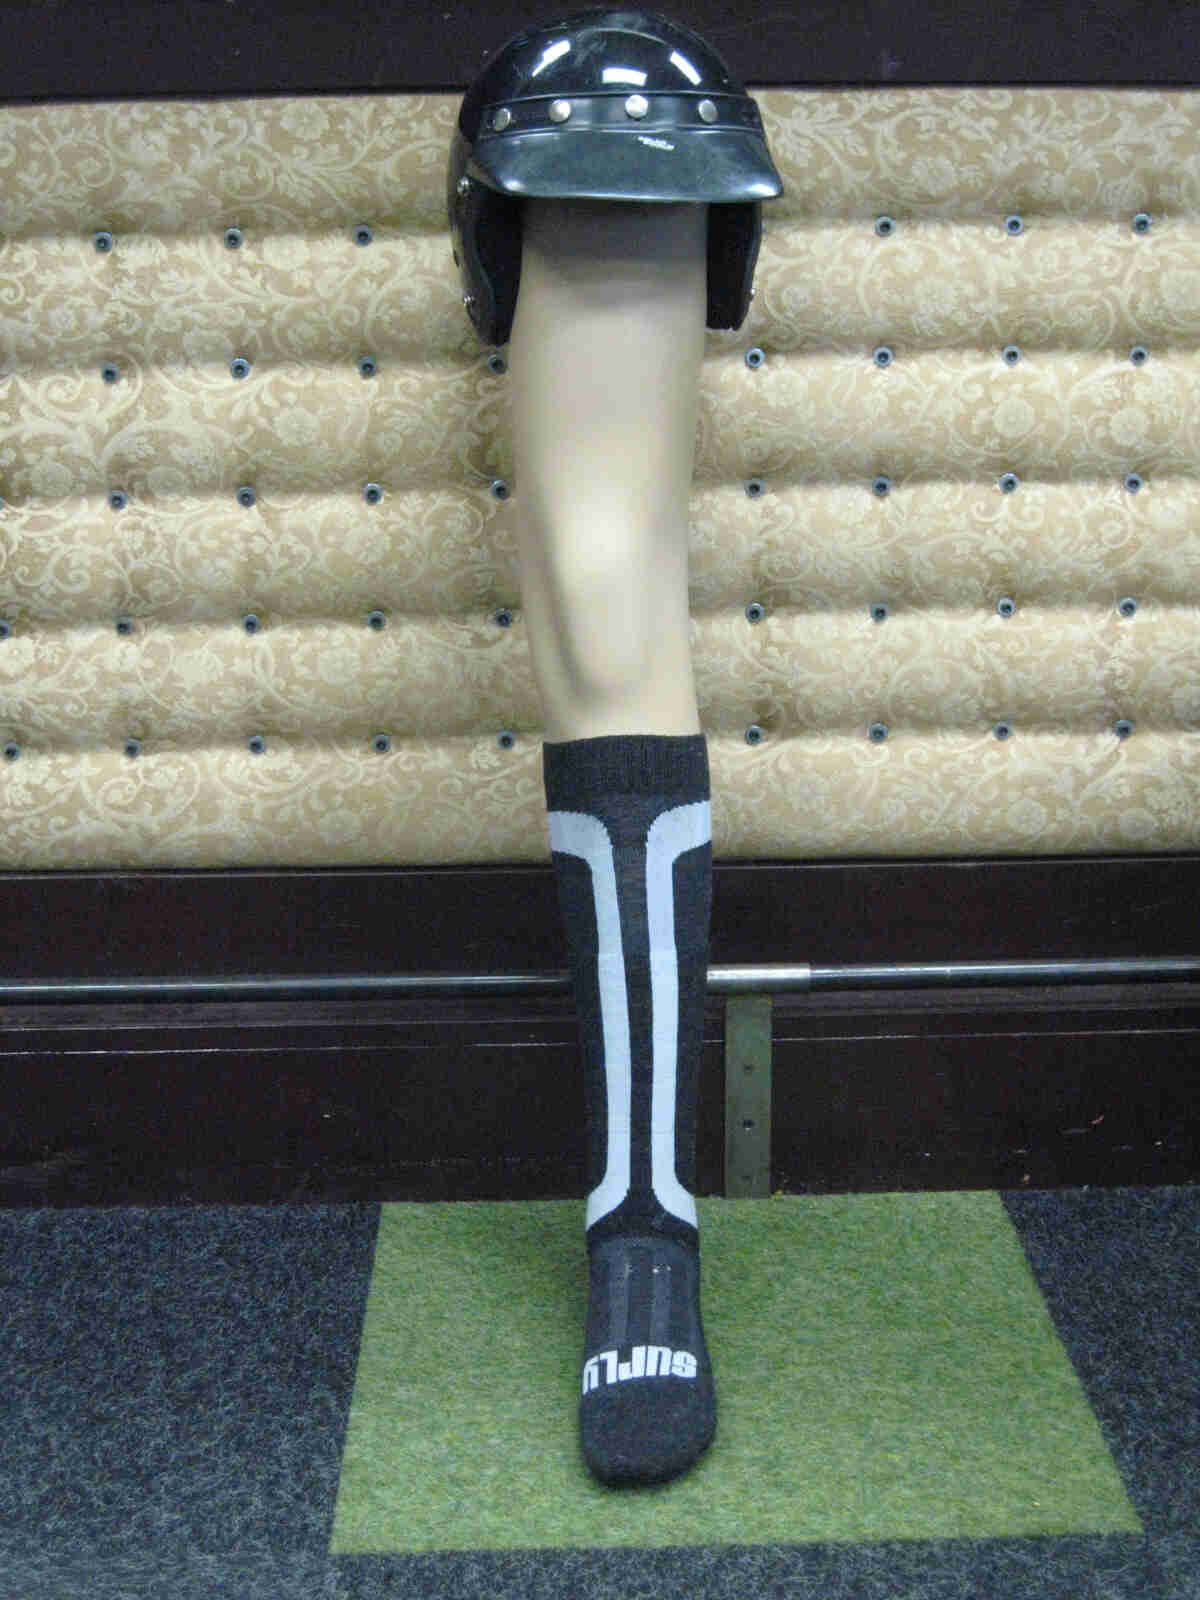 Front, vertical view of a mannequin leg, wearing a Surly Tall Sock and a helmet on top, leaning against a padded wall